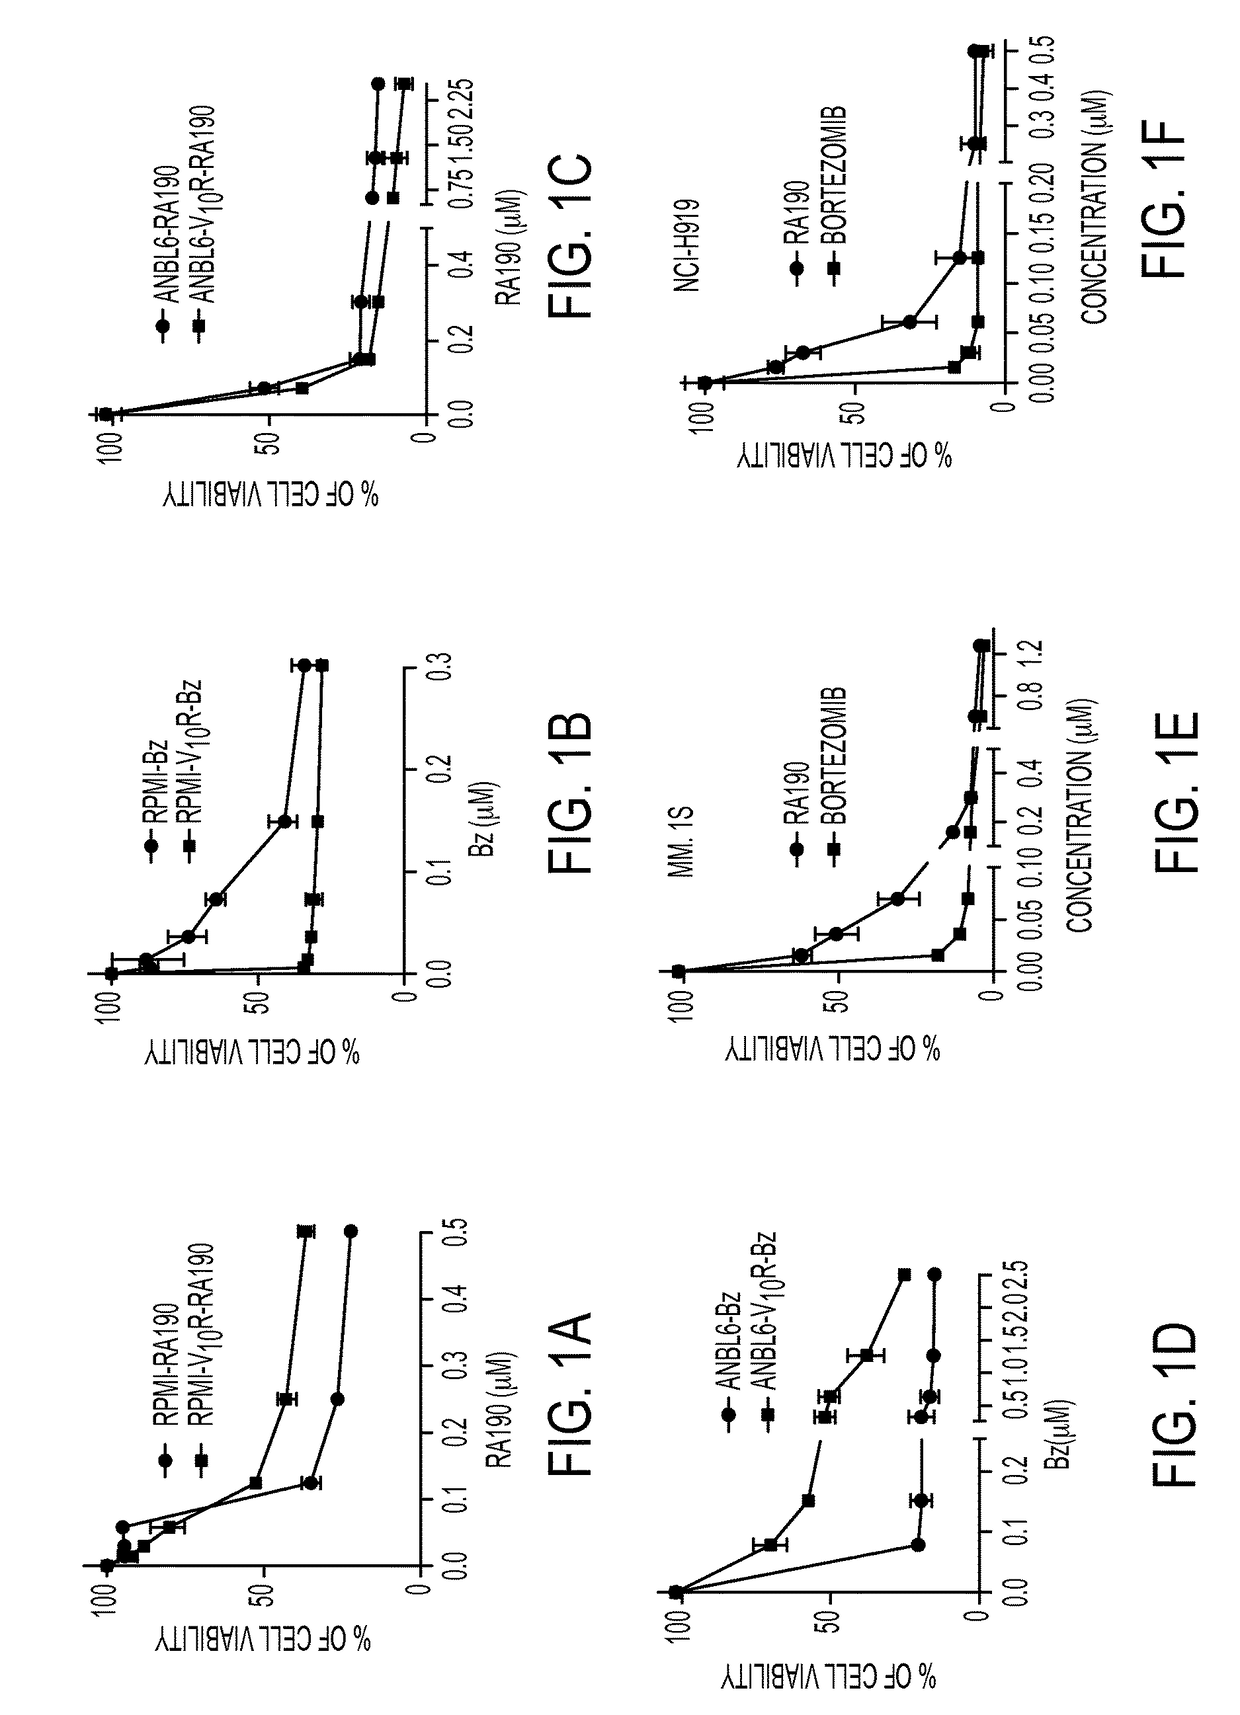 Bis-benzylidine piperidone proteasome inhibitor with anticancer activity